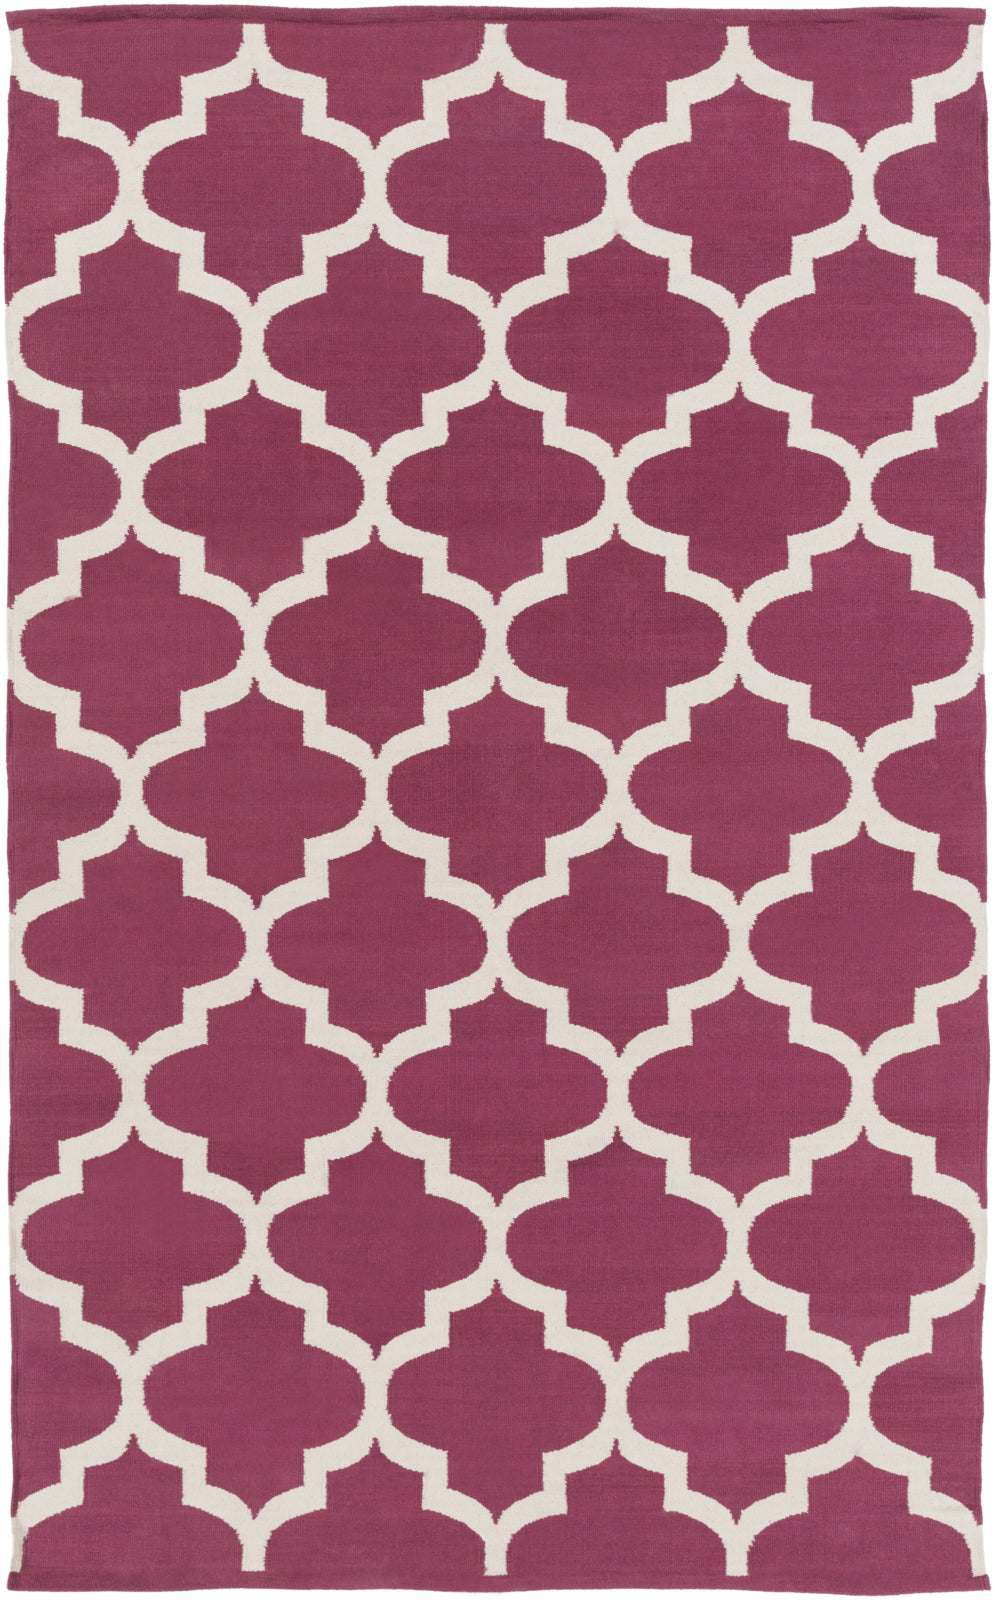 Artistic Weavers Vogue Everly AWLT3006 Area Rug main image